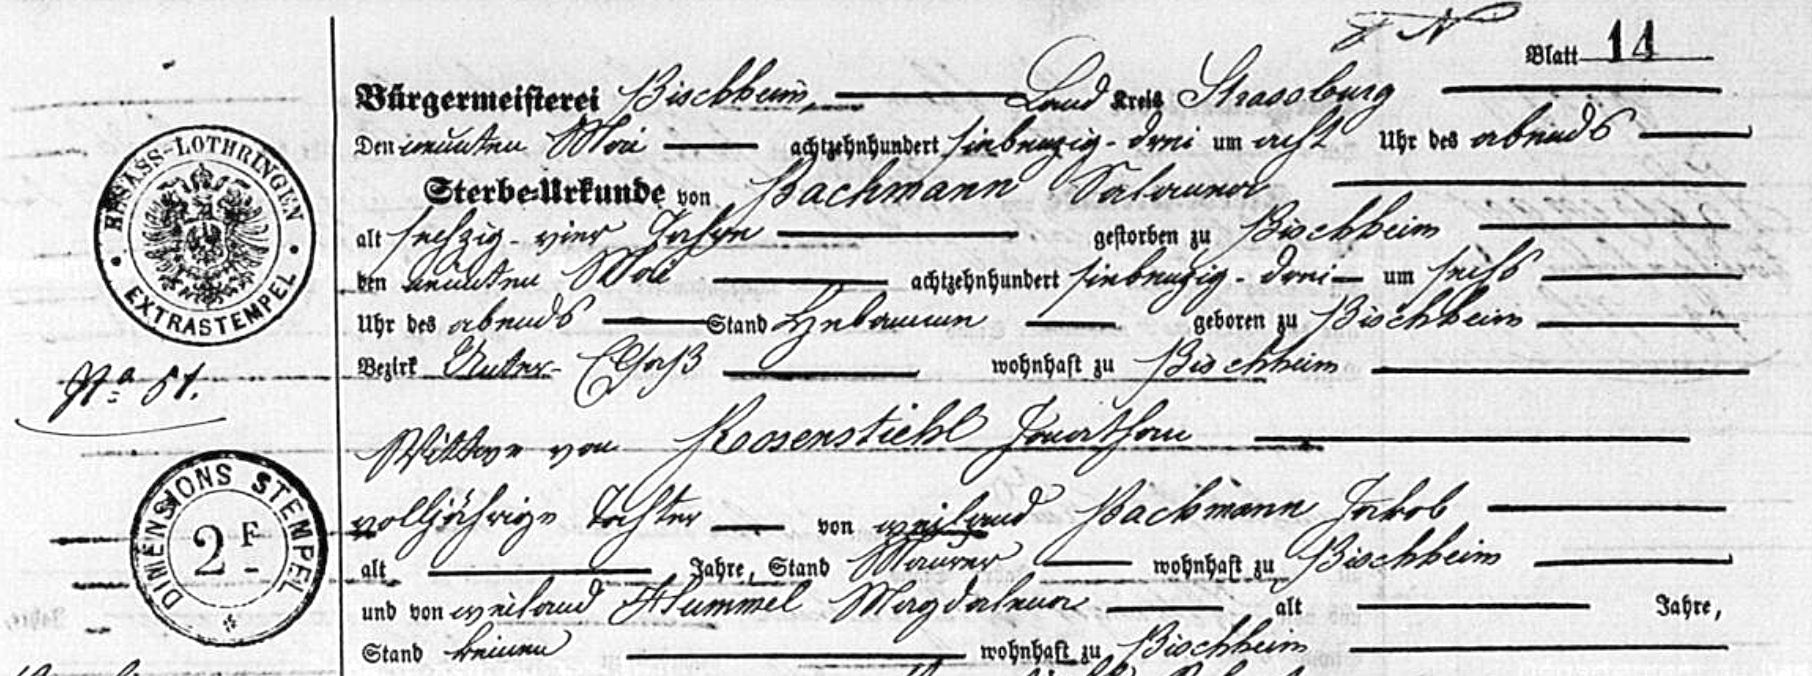 Beginning of a death record from 1873 in Bas-Rhin